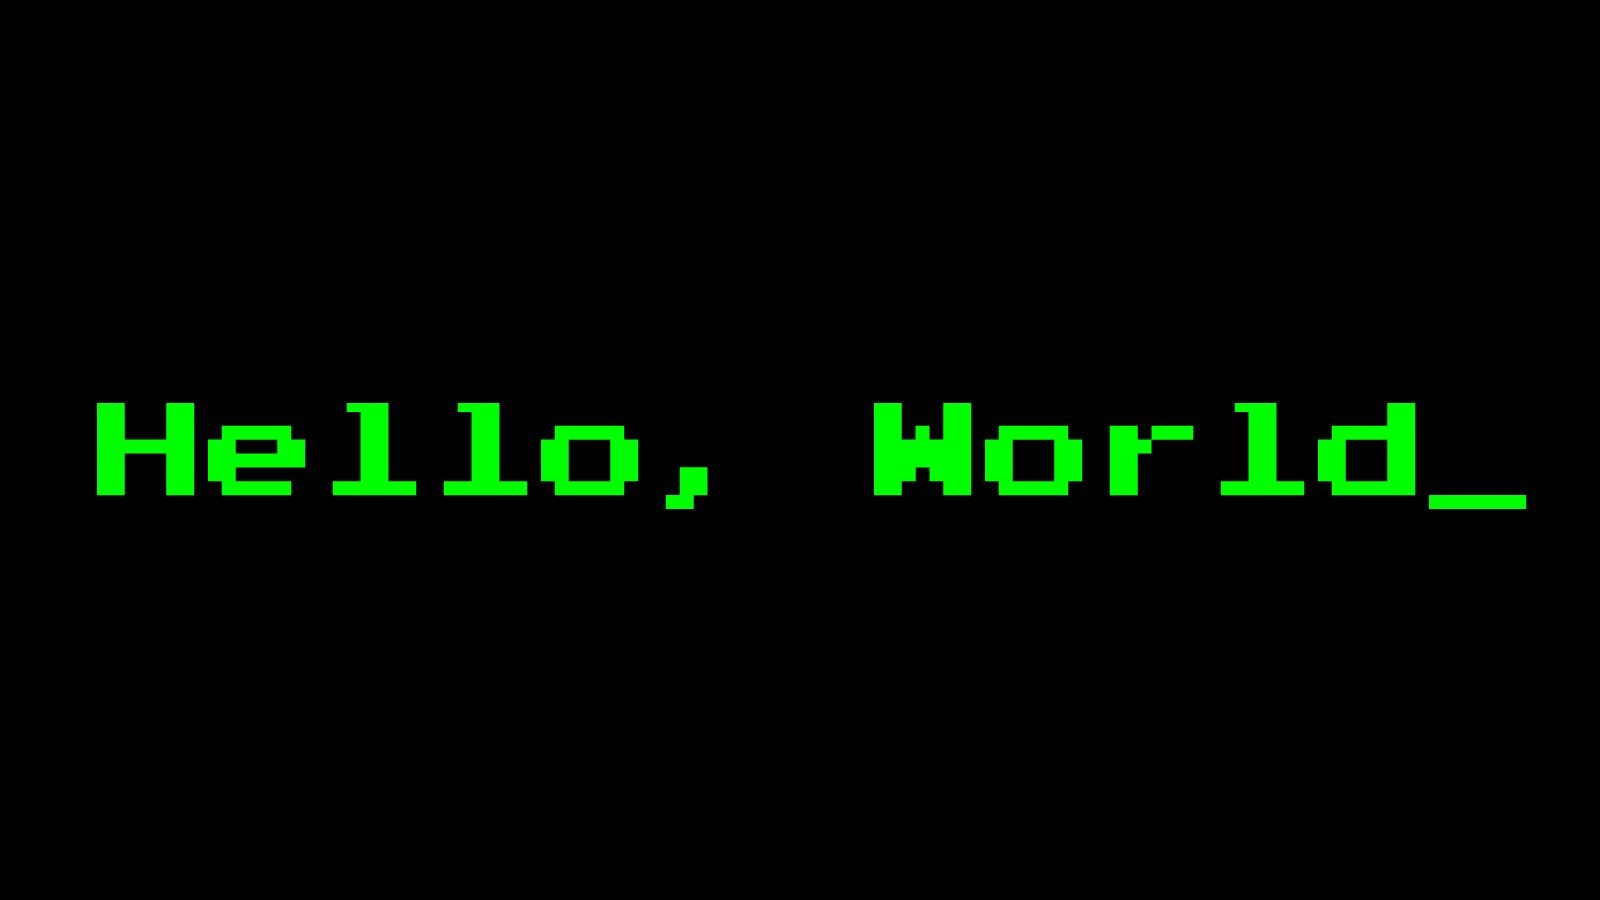 Every thing about Hello World